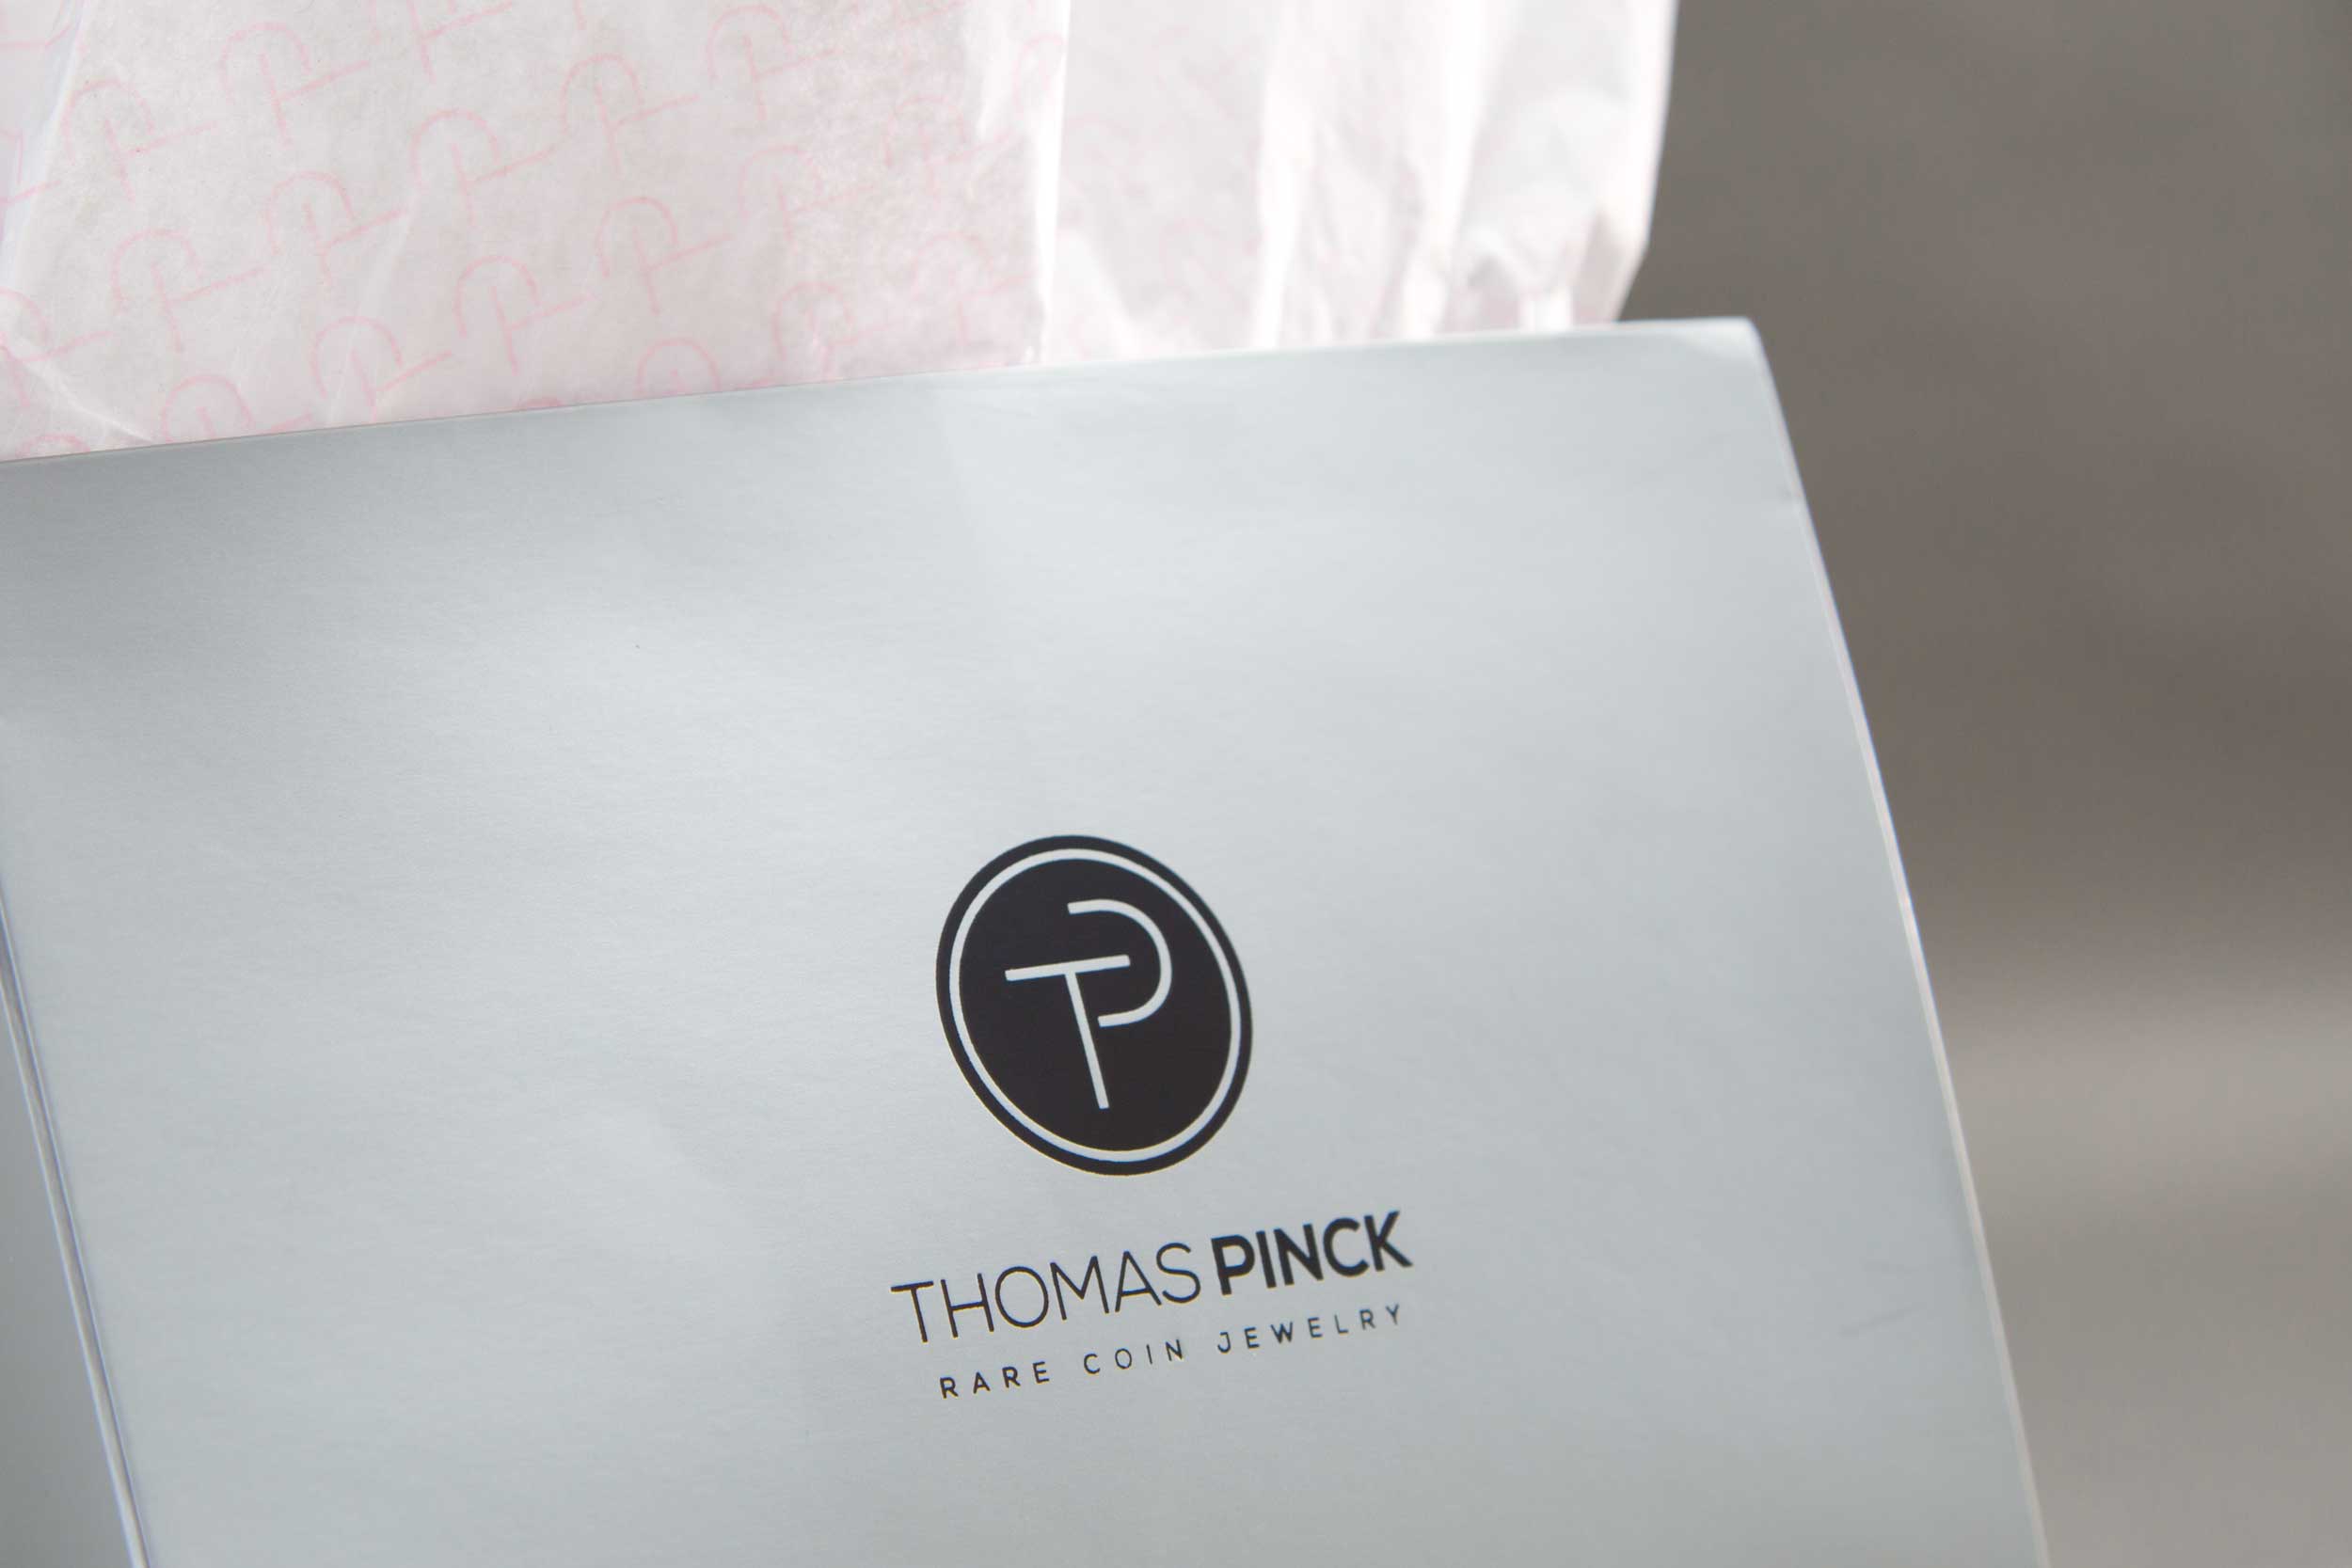 Thomas Pinck silver euro bag that customers receive when making a purchase.